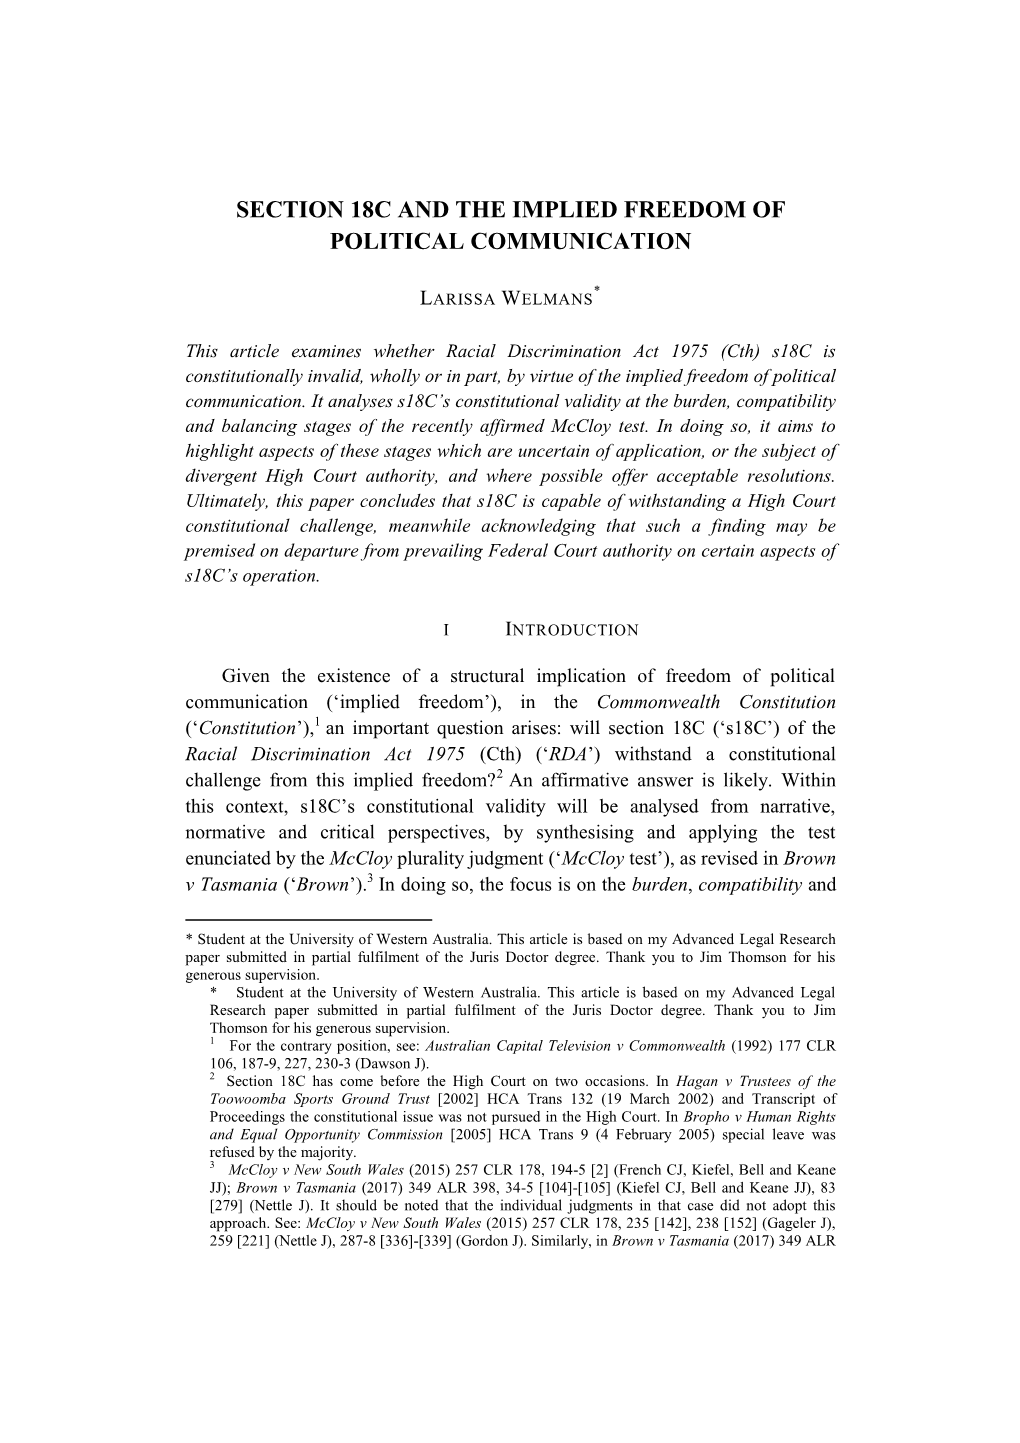 Section 18C and the Implied Freedom of Political Communication